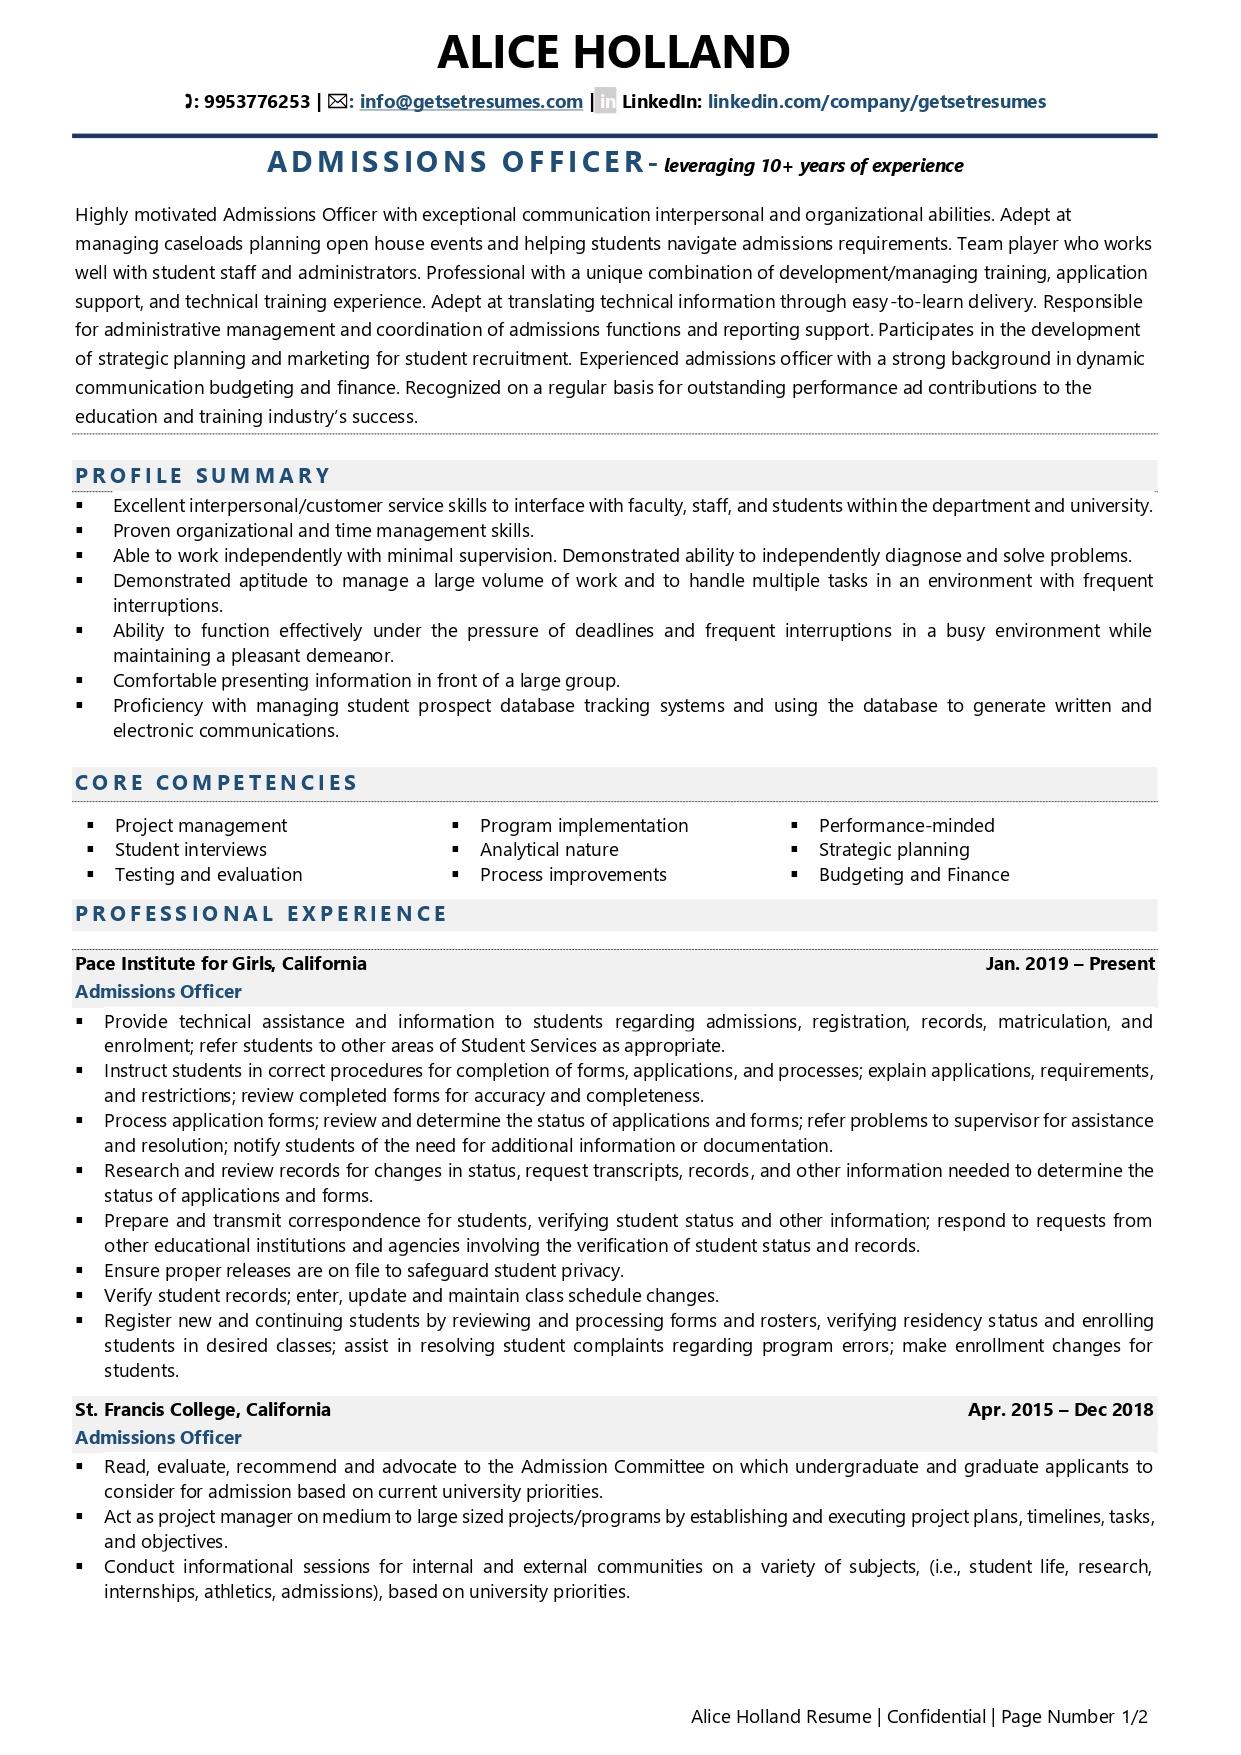 Admissions Officer - Resume Example & Template